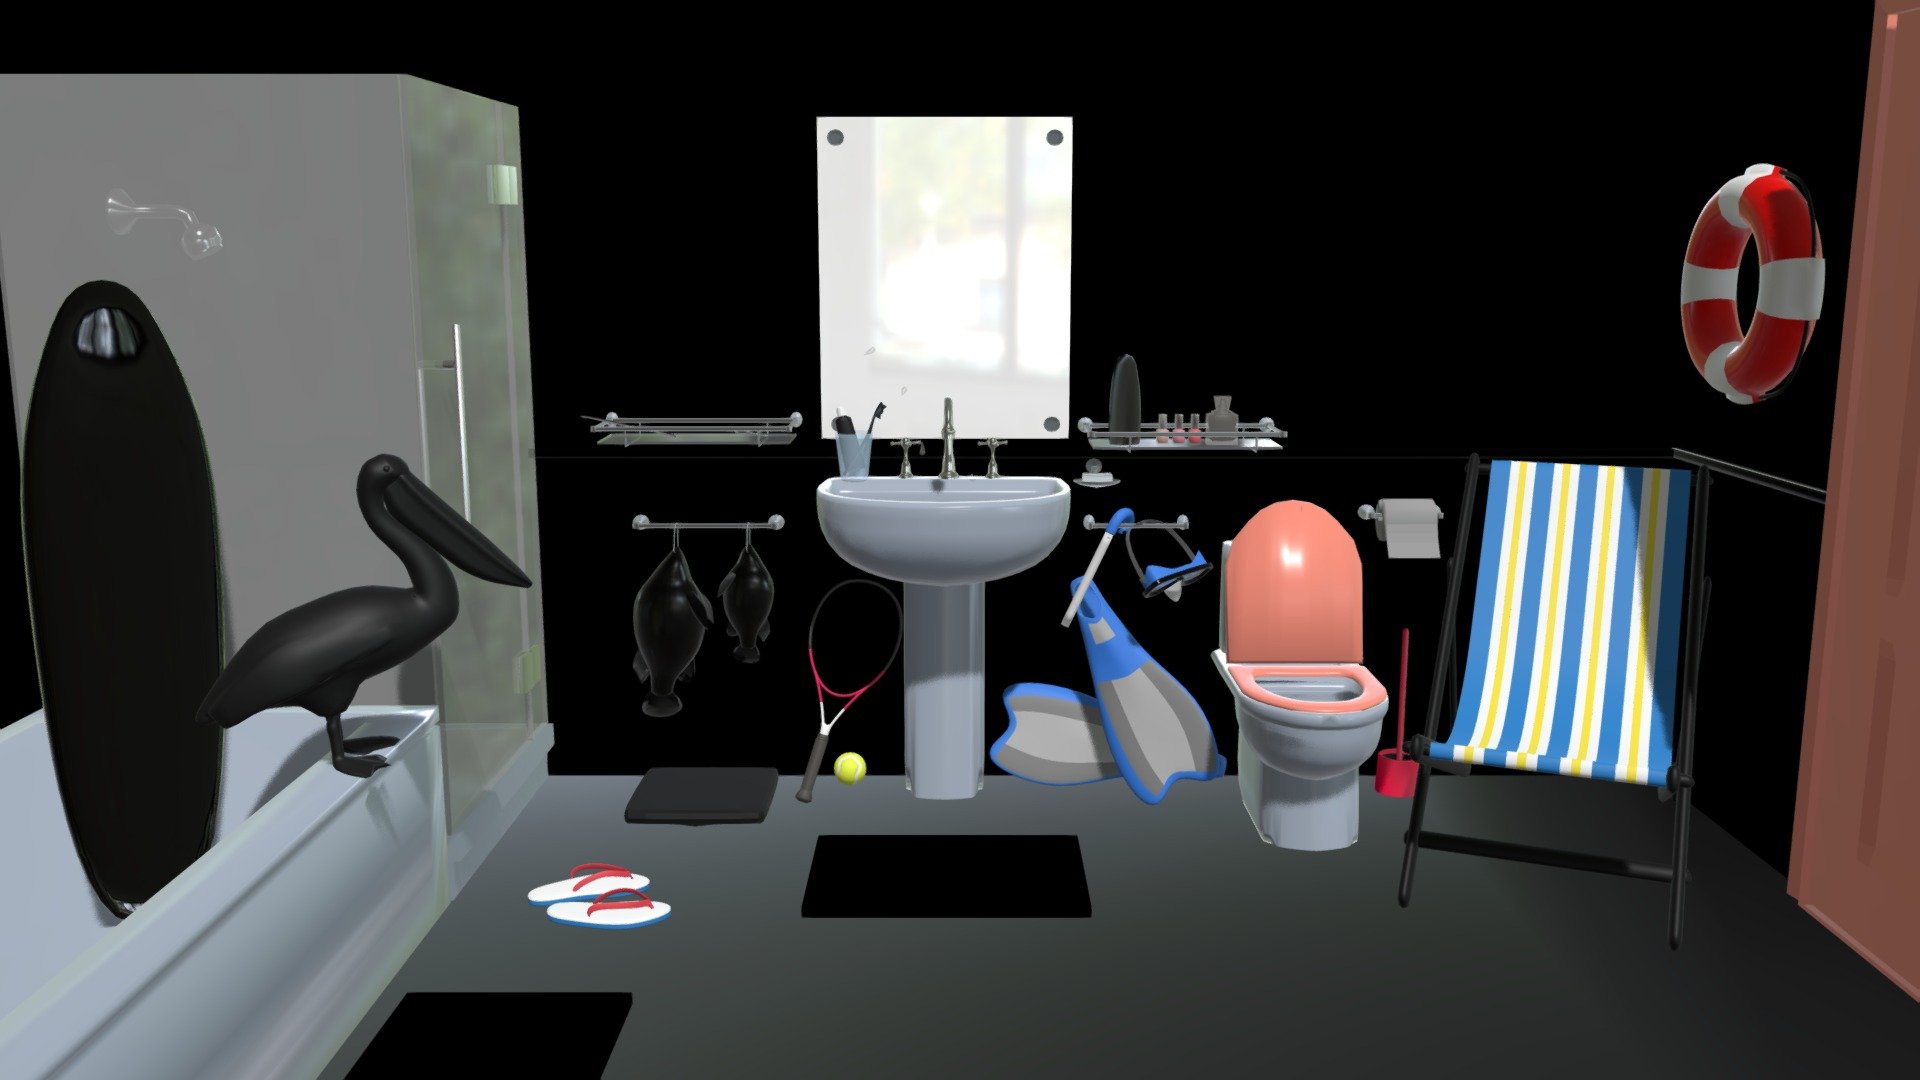 The model is made for an IQ test of primary school kids.
Find 13 differences between the two bathrooms 3d model